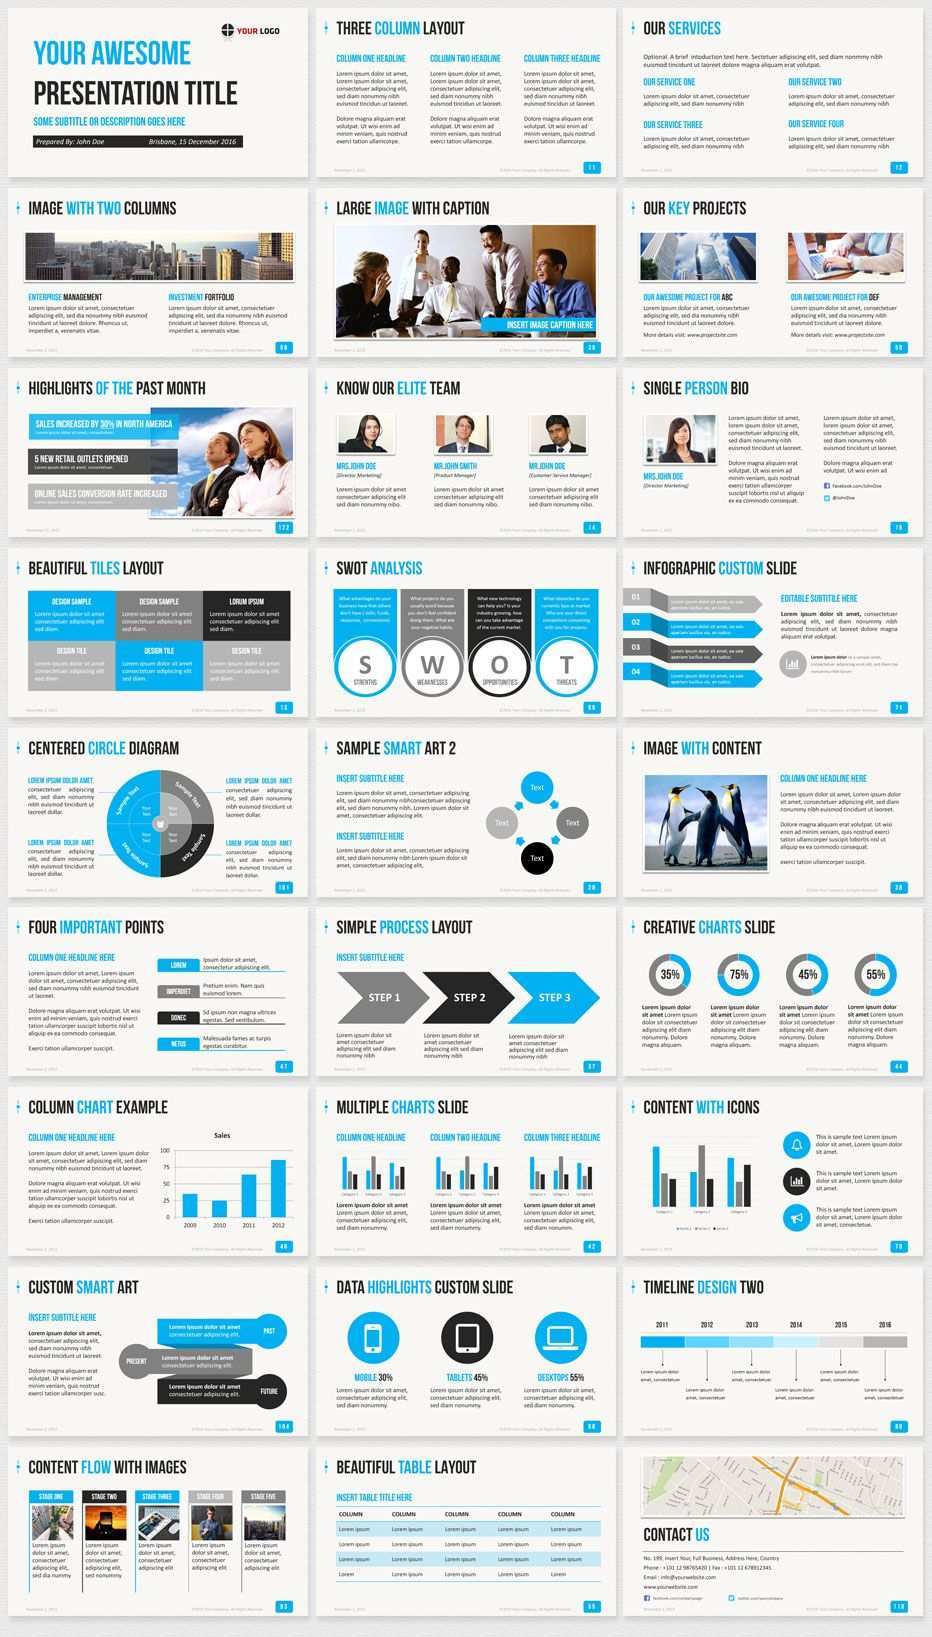 Ultimate Professional Business Powerpoint Template 6 In 1 Powerpoint Design Templates Business Powerpoint Templates Professional Presentation Templates